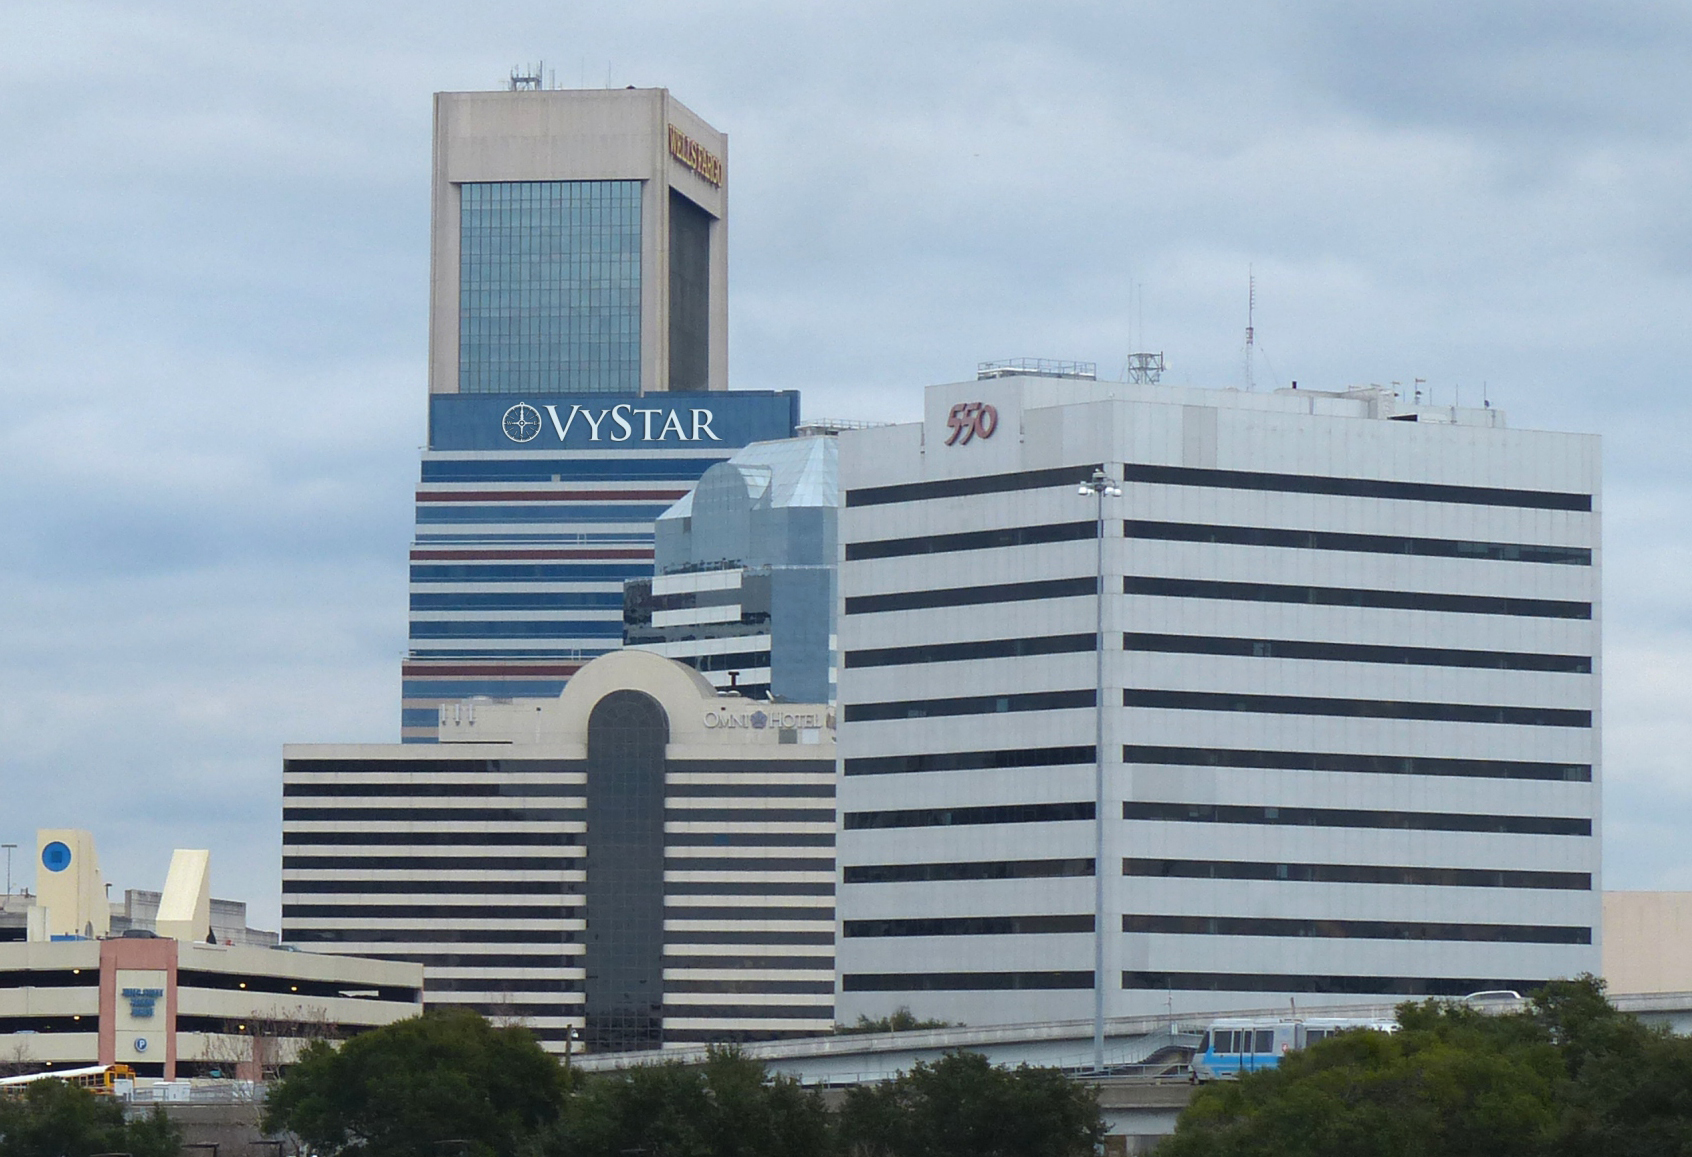 The VyStar sign is seen from two-thirds of a mile away in this rendering.